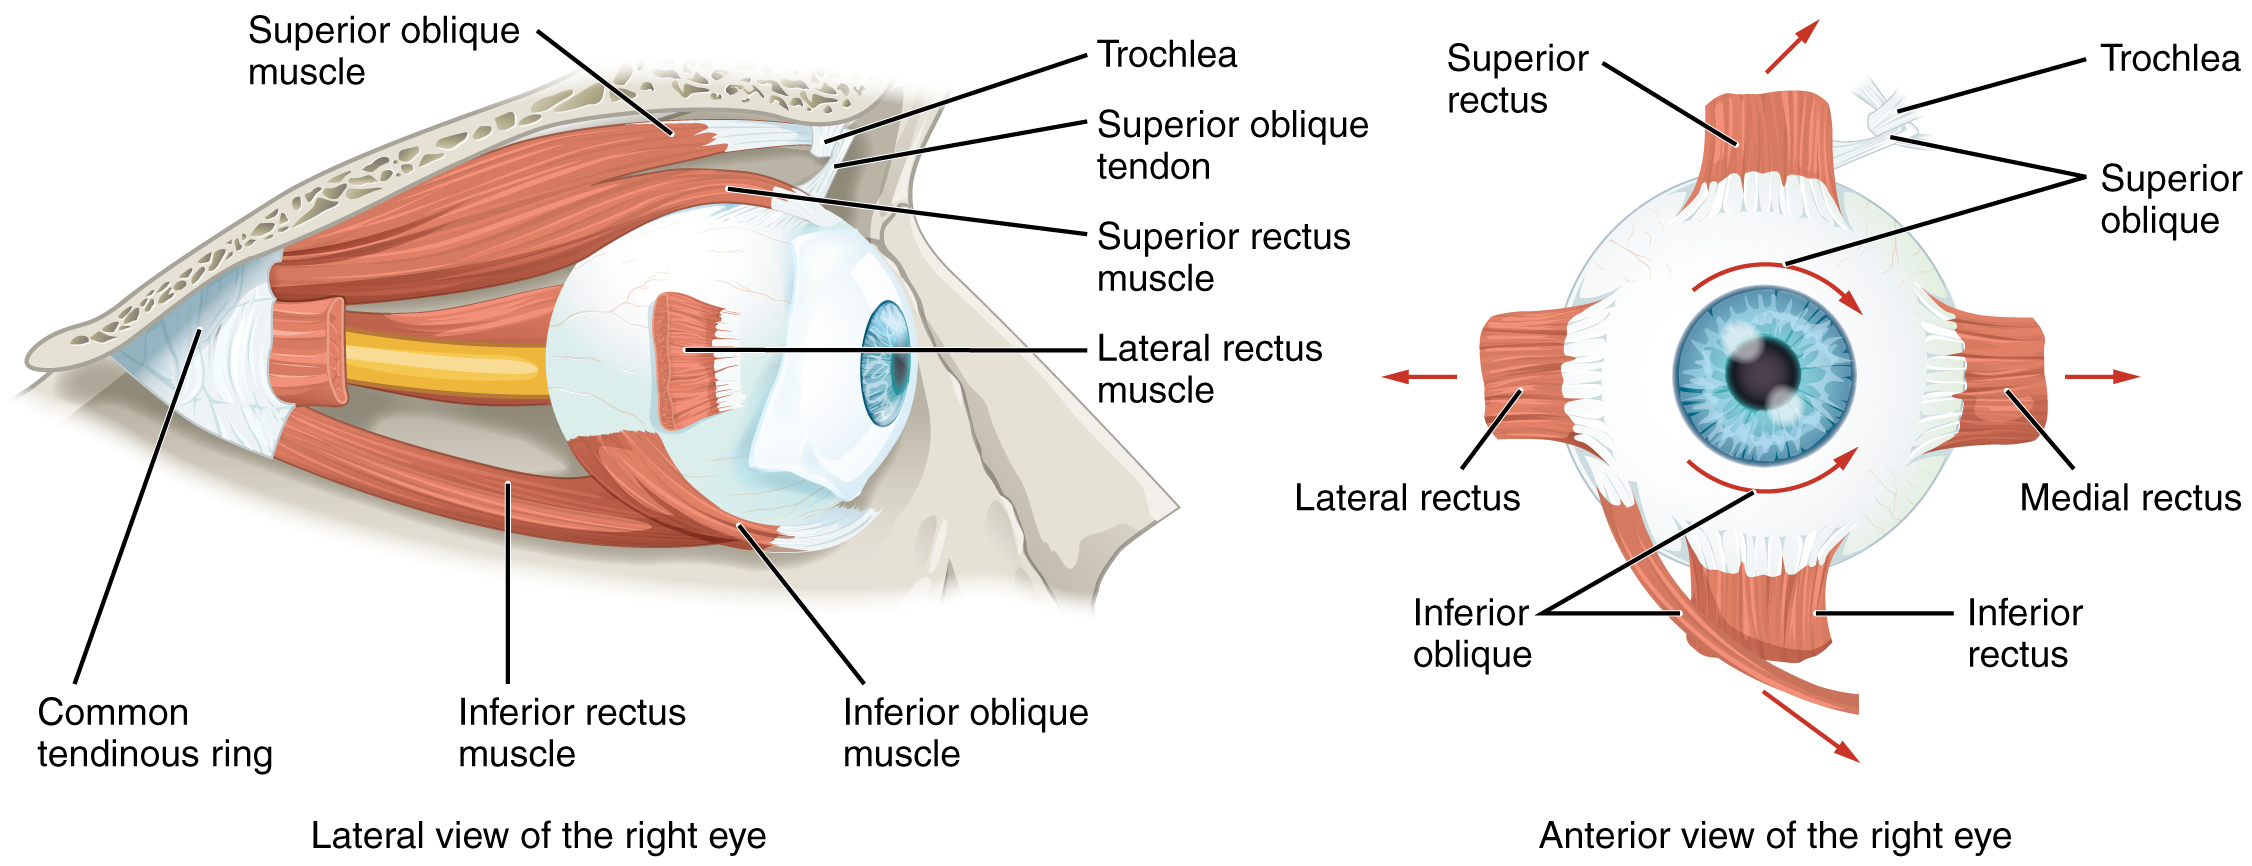 Lateral and anterior views of the eye showing the extraocular muscles and movements